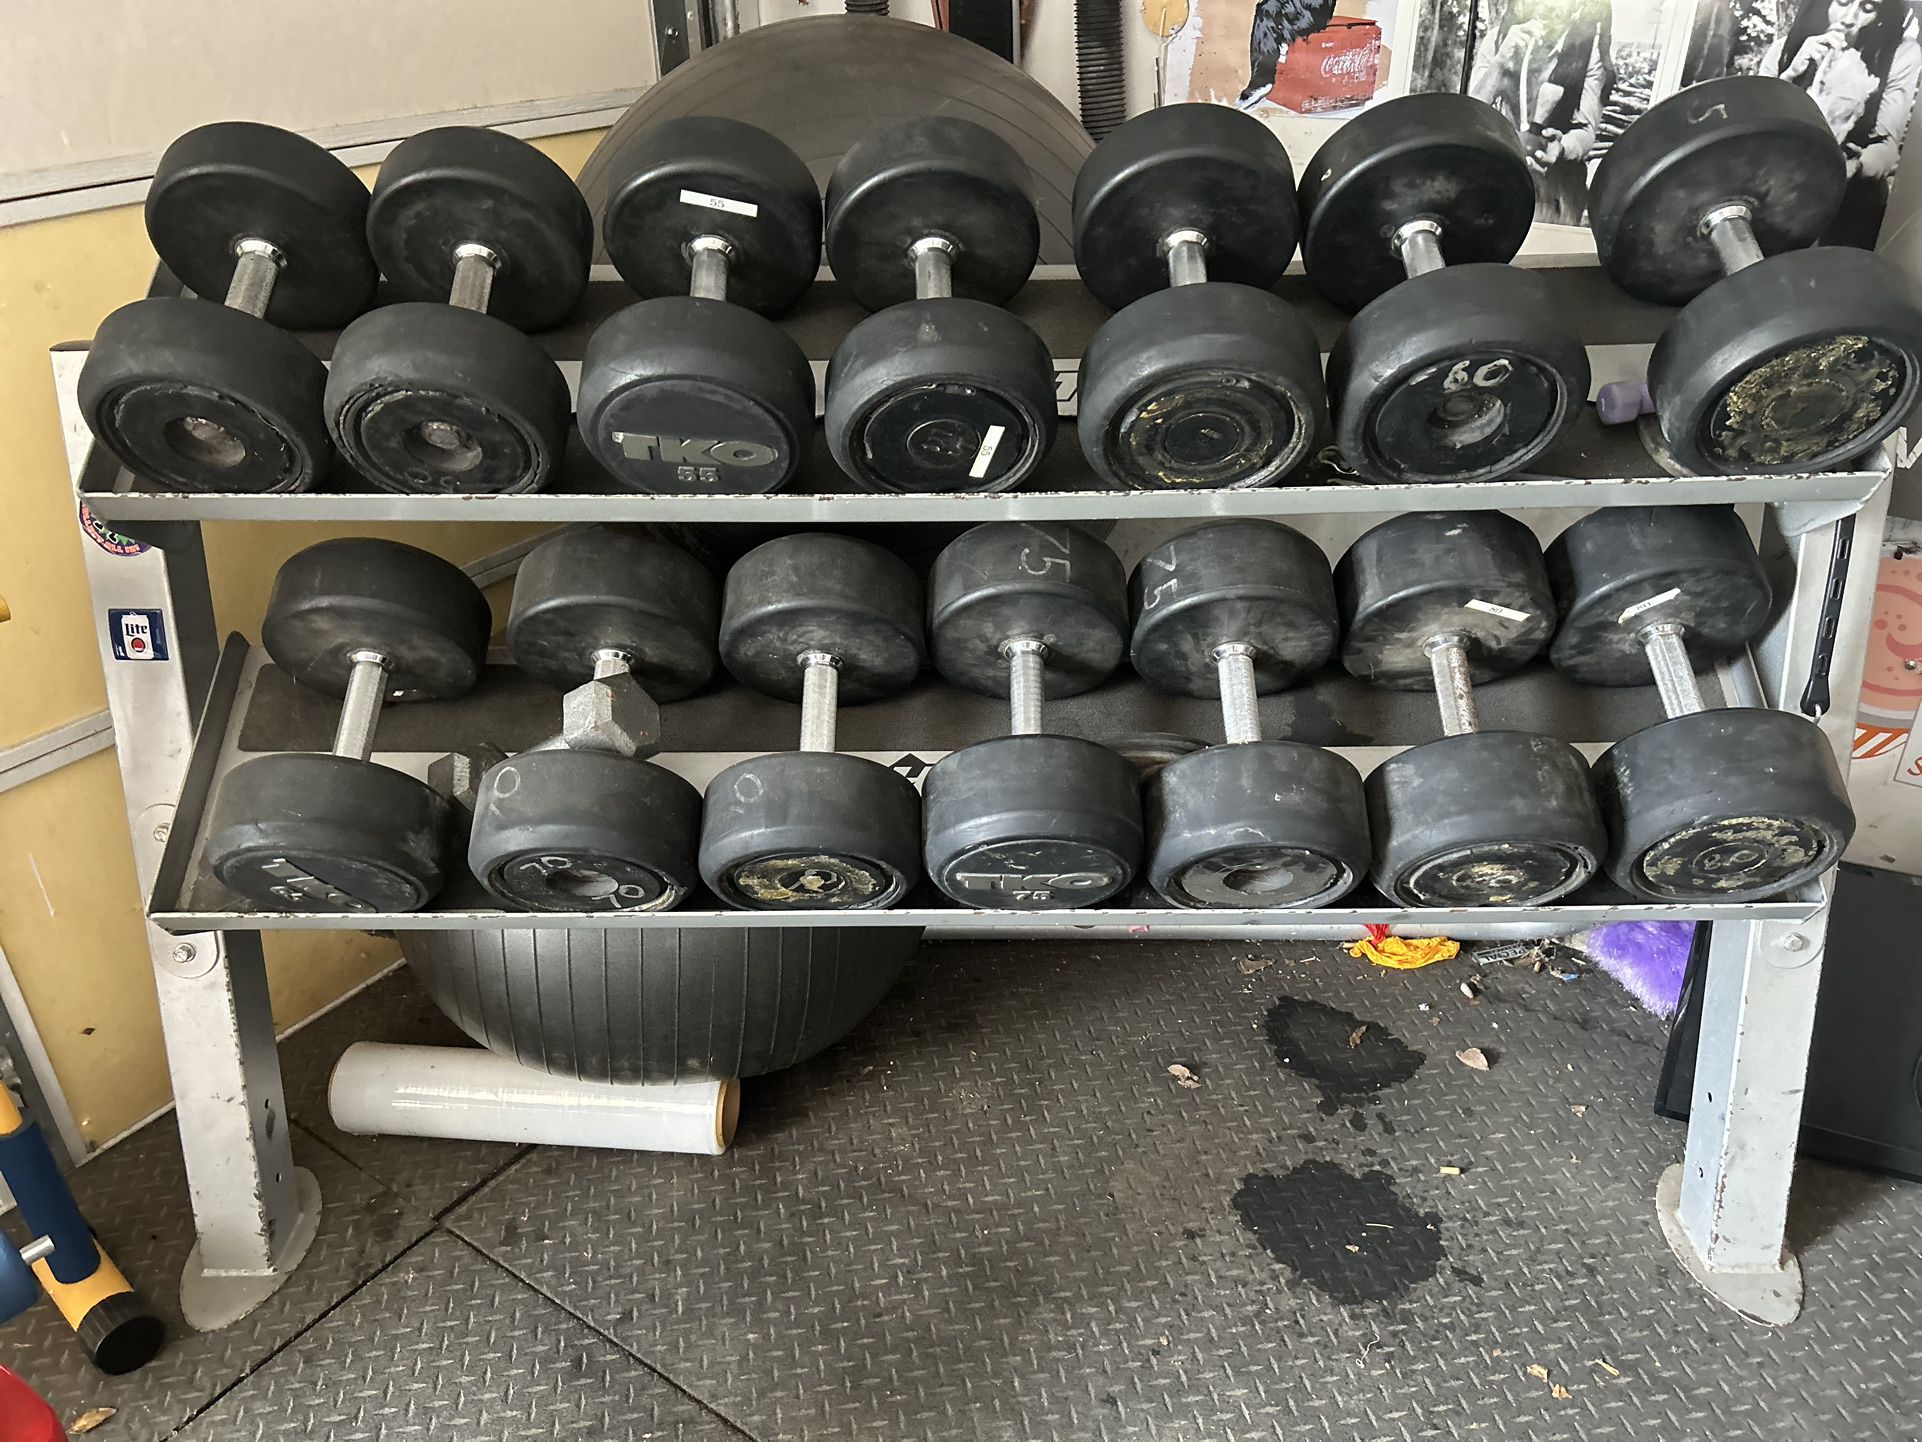 TKO DUMBBELL SET AND RACK $1400